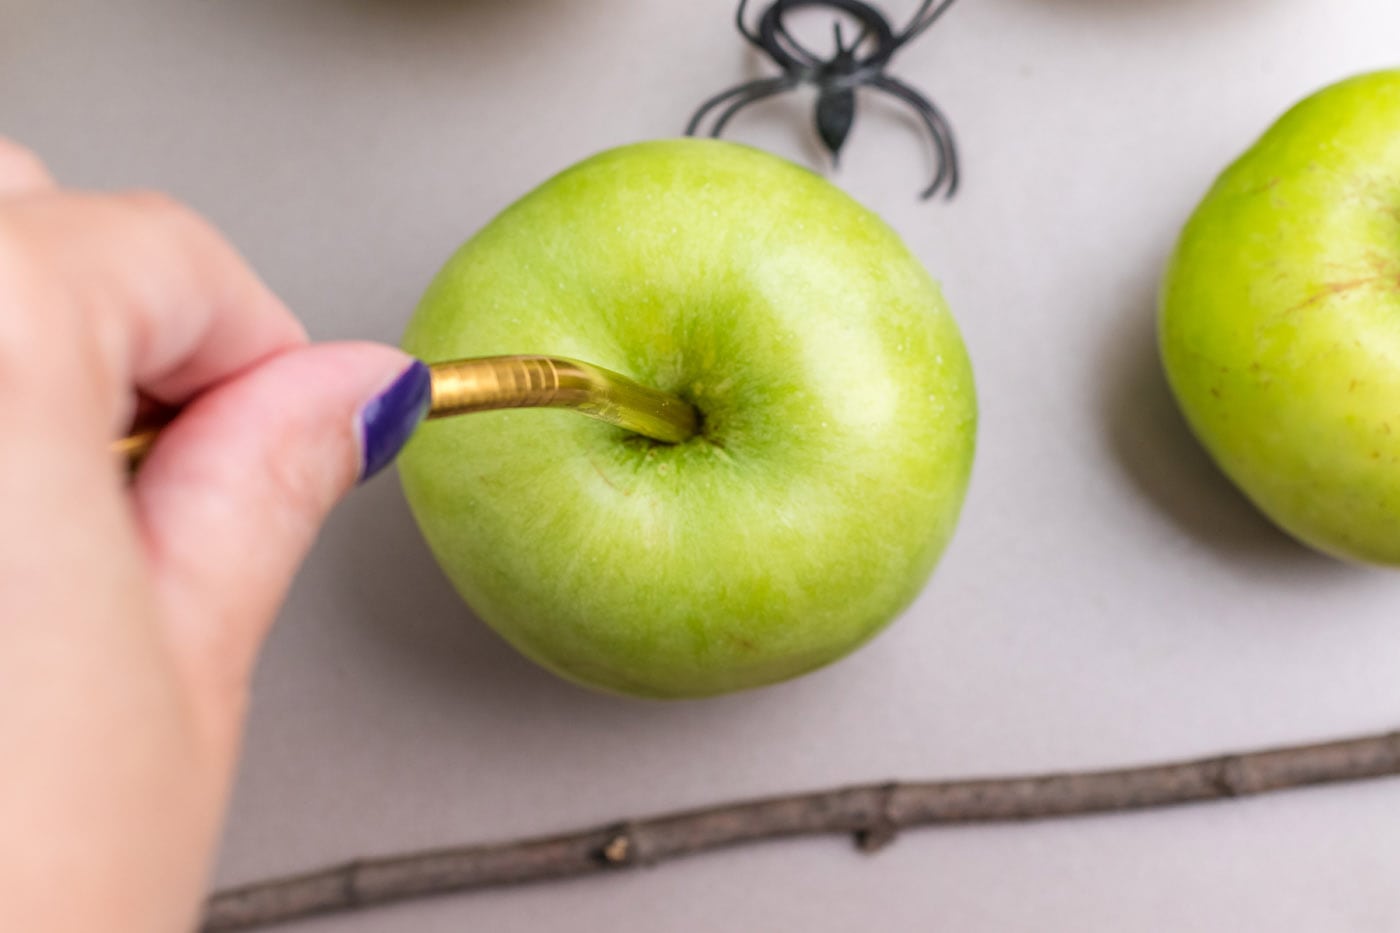 sticking a metal straw into green apple